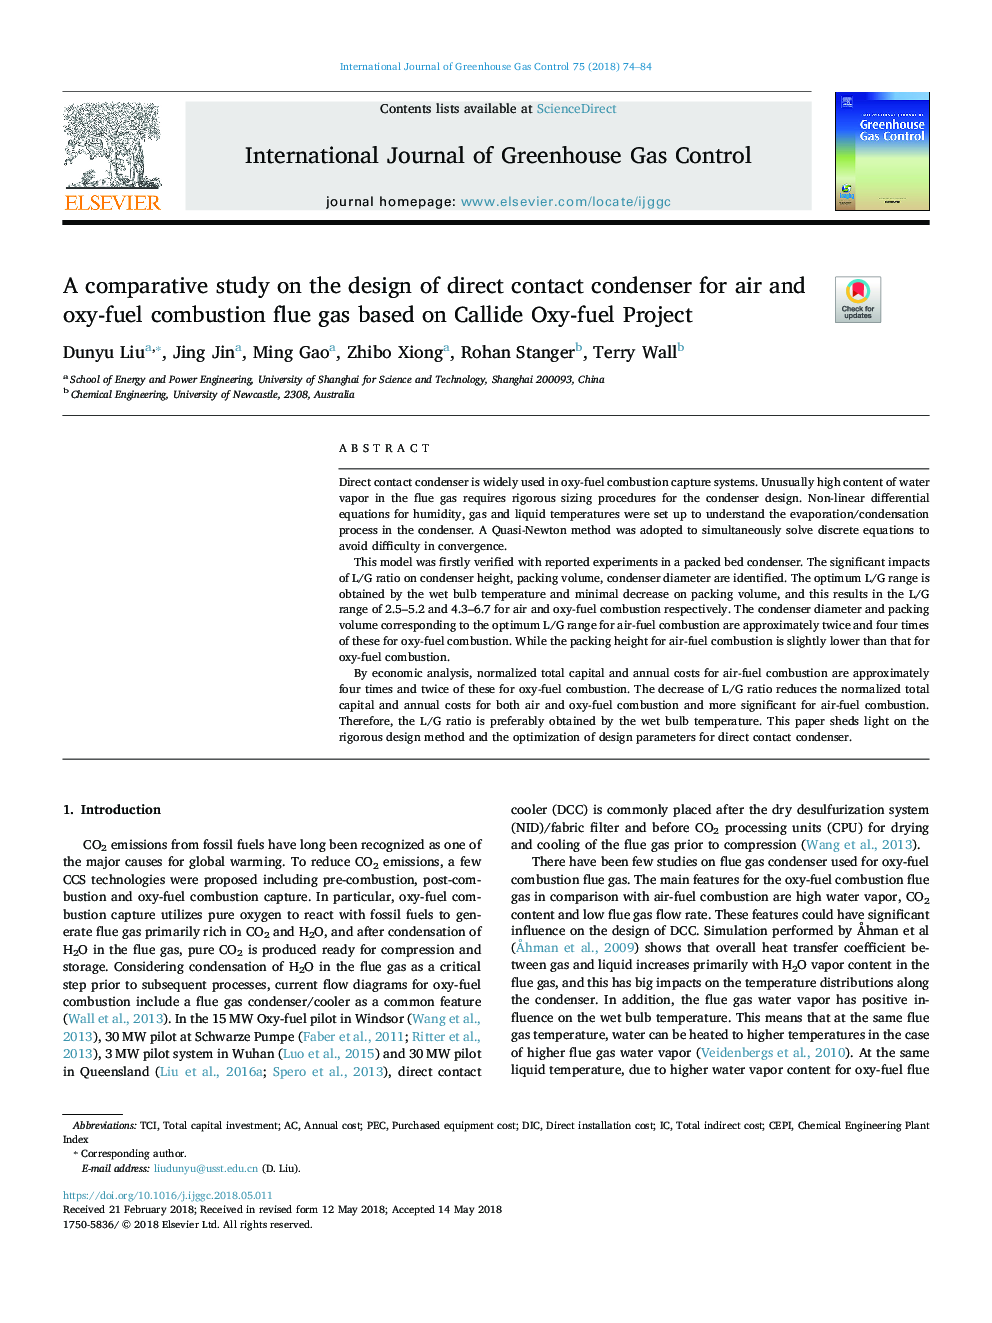 A comparative study on the design of direct contact condenser for air and oxy-fuel combustion flue gas based on Callide Oxy-fuel Project